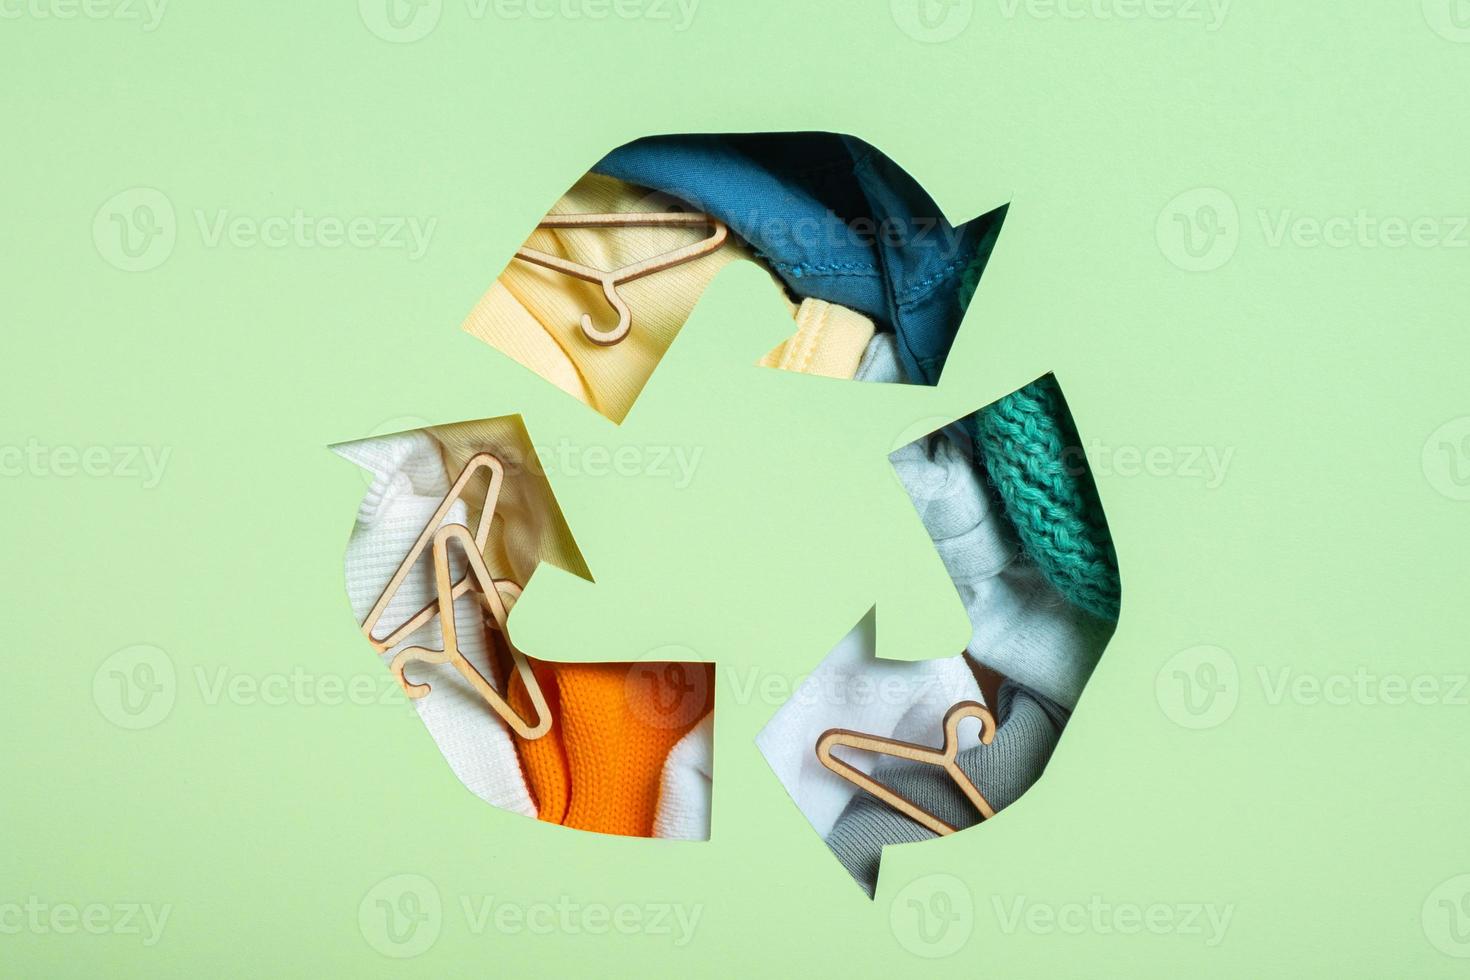 Colorful clothes and mini hungers under paper cut recycling symbol. Second hand, circular fashion and recycling concept photo